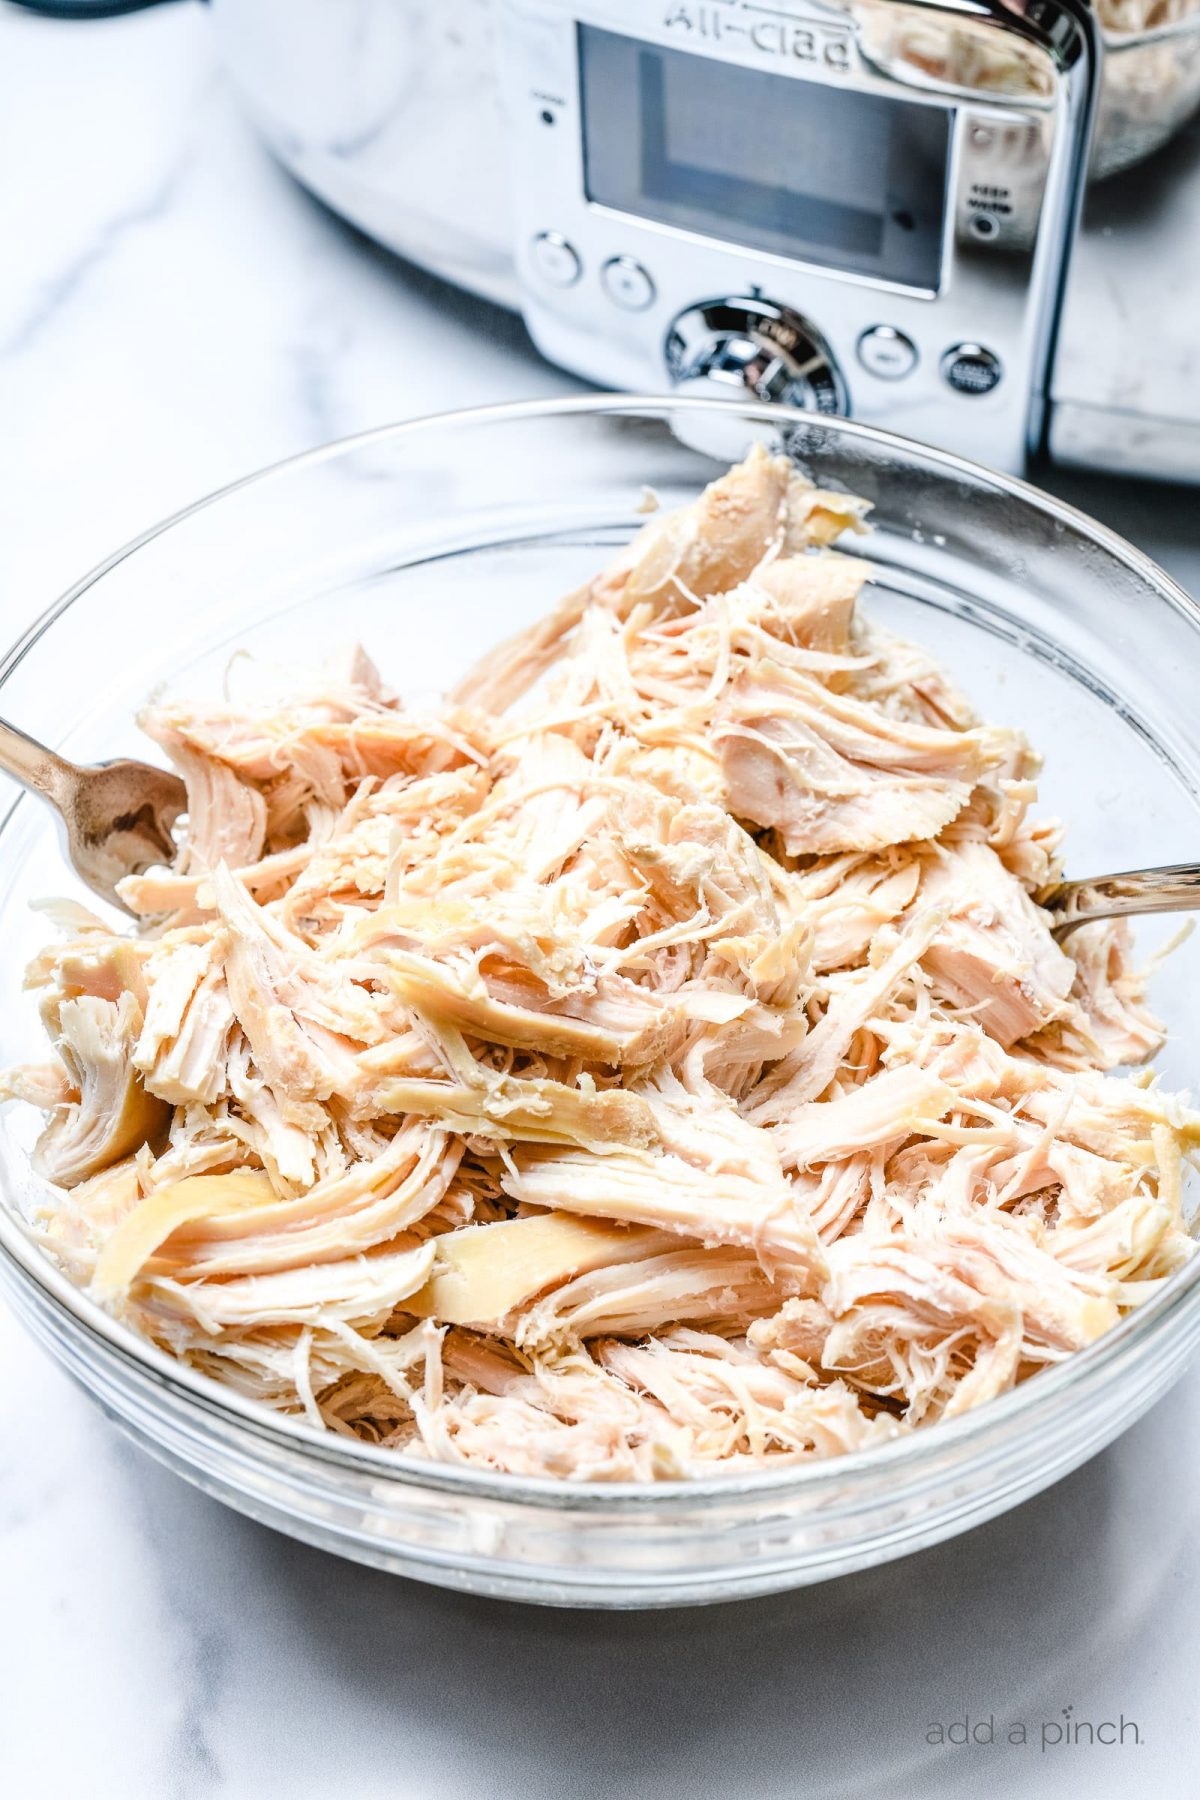 Shredded chicken in a clear glass bowl with two forks in the bowl and an instant pot in the background.